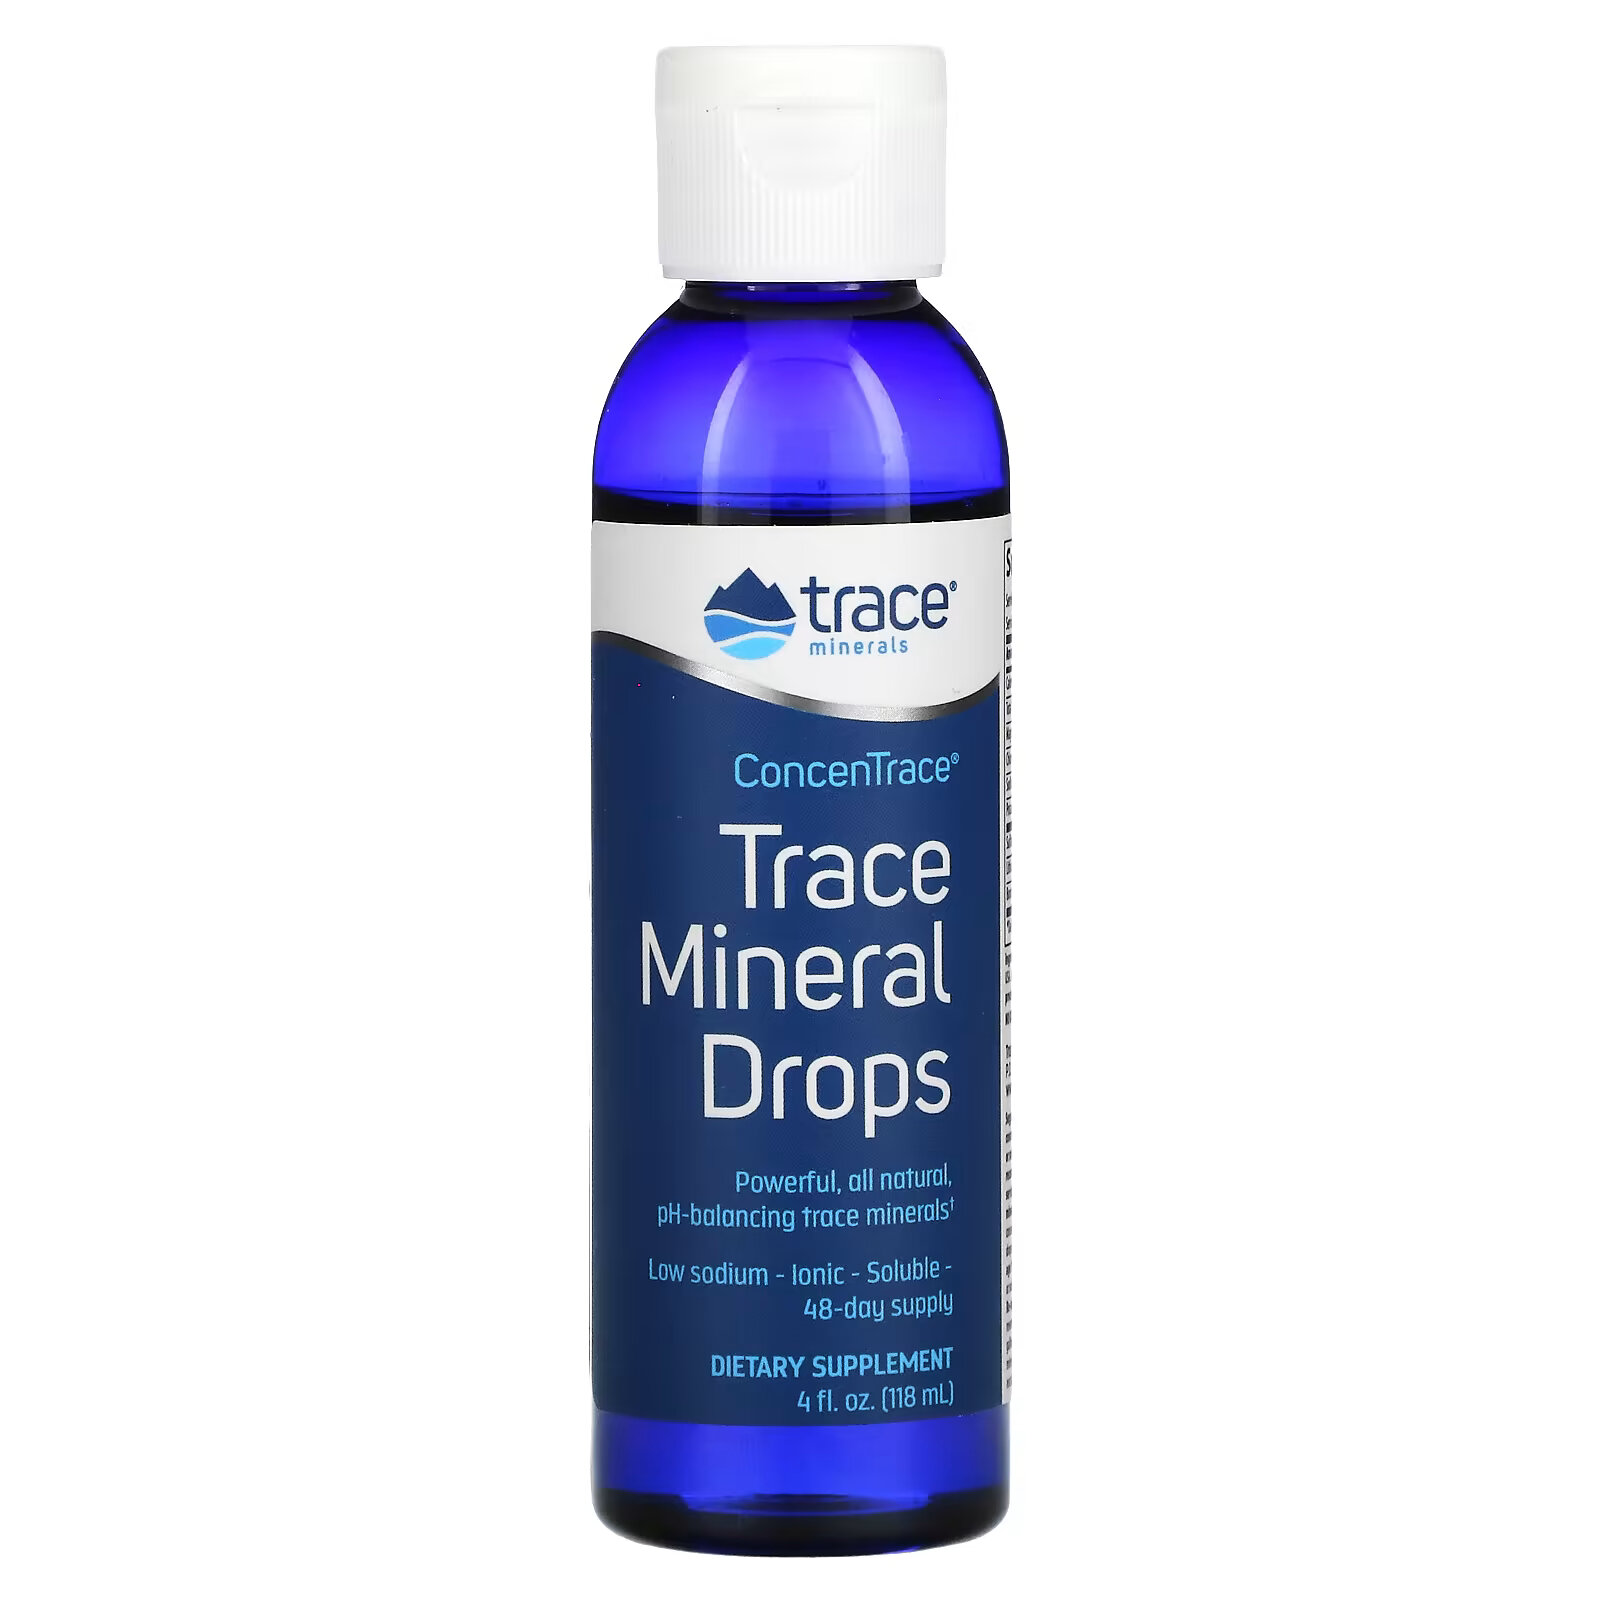 Trace Minerals ConcenTrace, капли с микроэлементами, 118 мл trace minerals concentrace таблетки с минералами и микроэлементами 300 таблеток